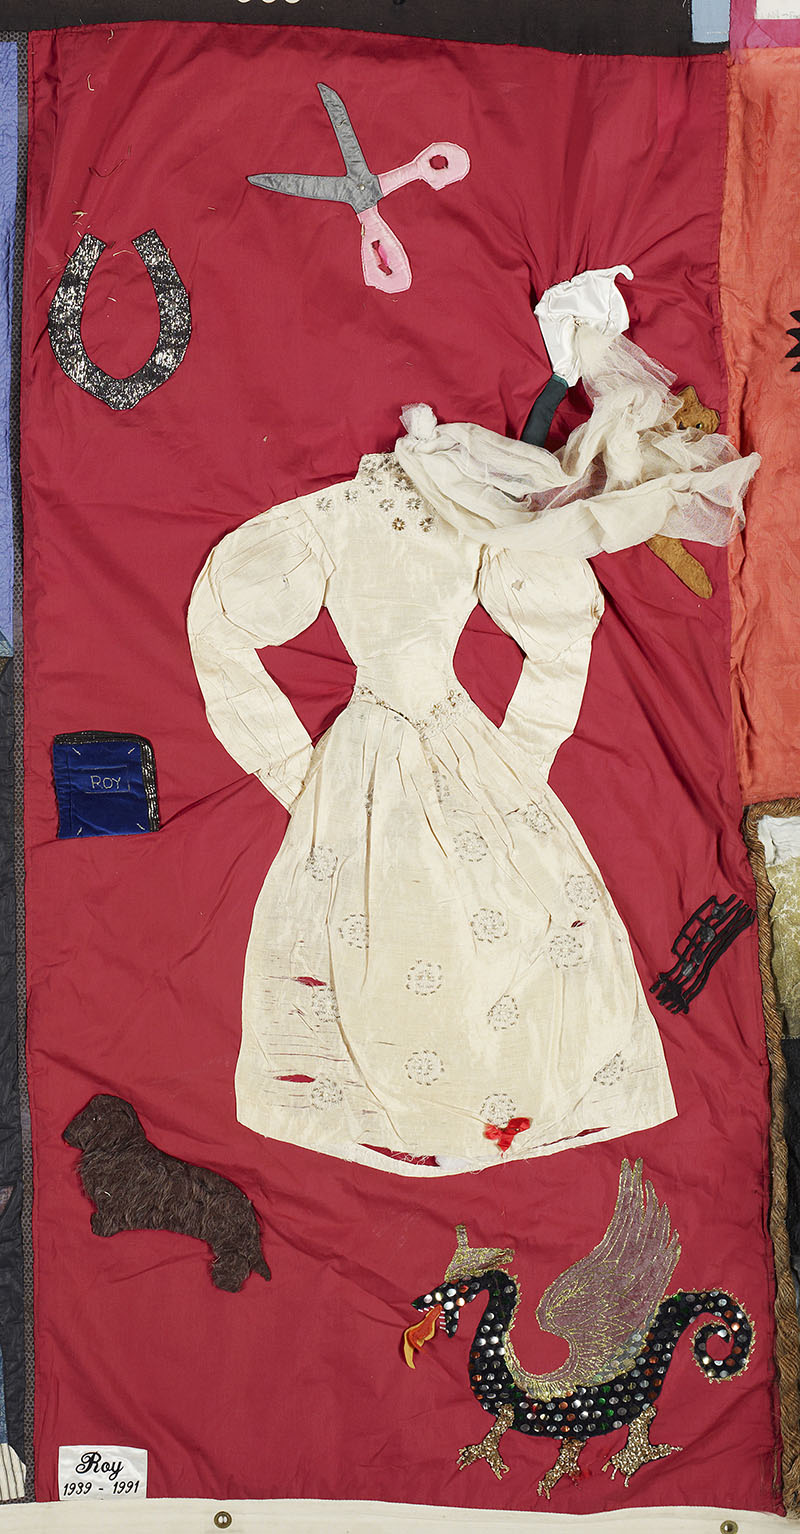 New Zealand AIDS Memorial Quilt  Collections Online - Museum of New  Zealand Te Papa Tongarewa